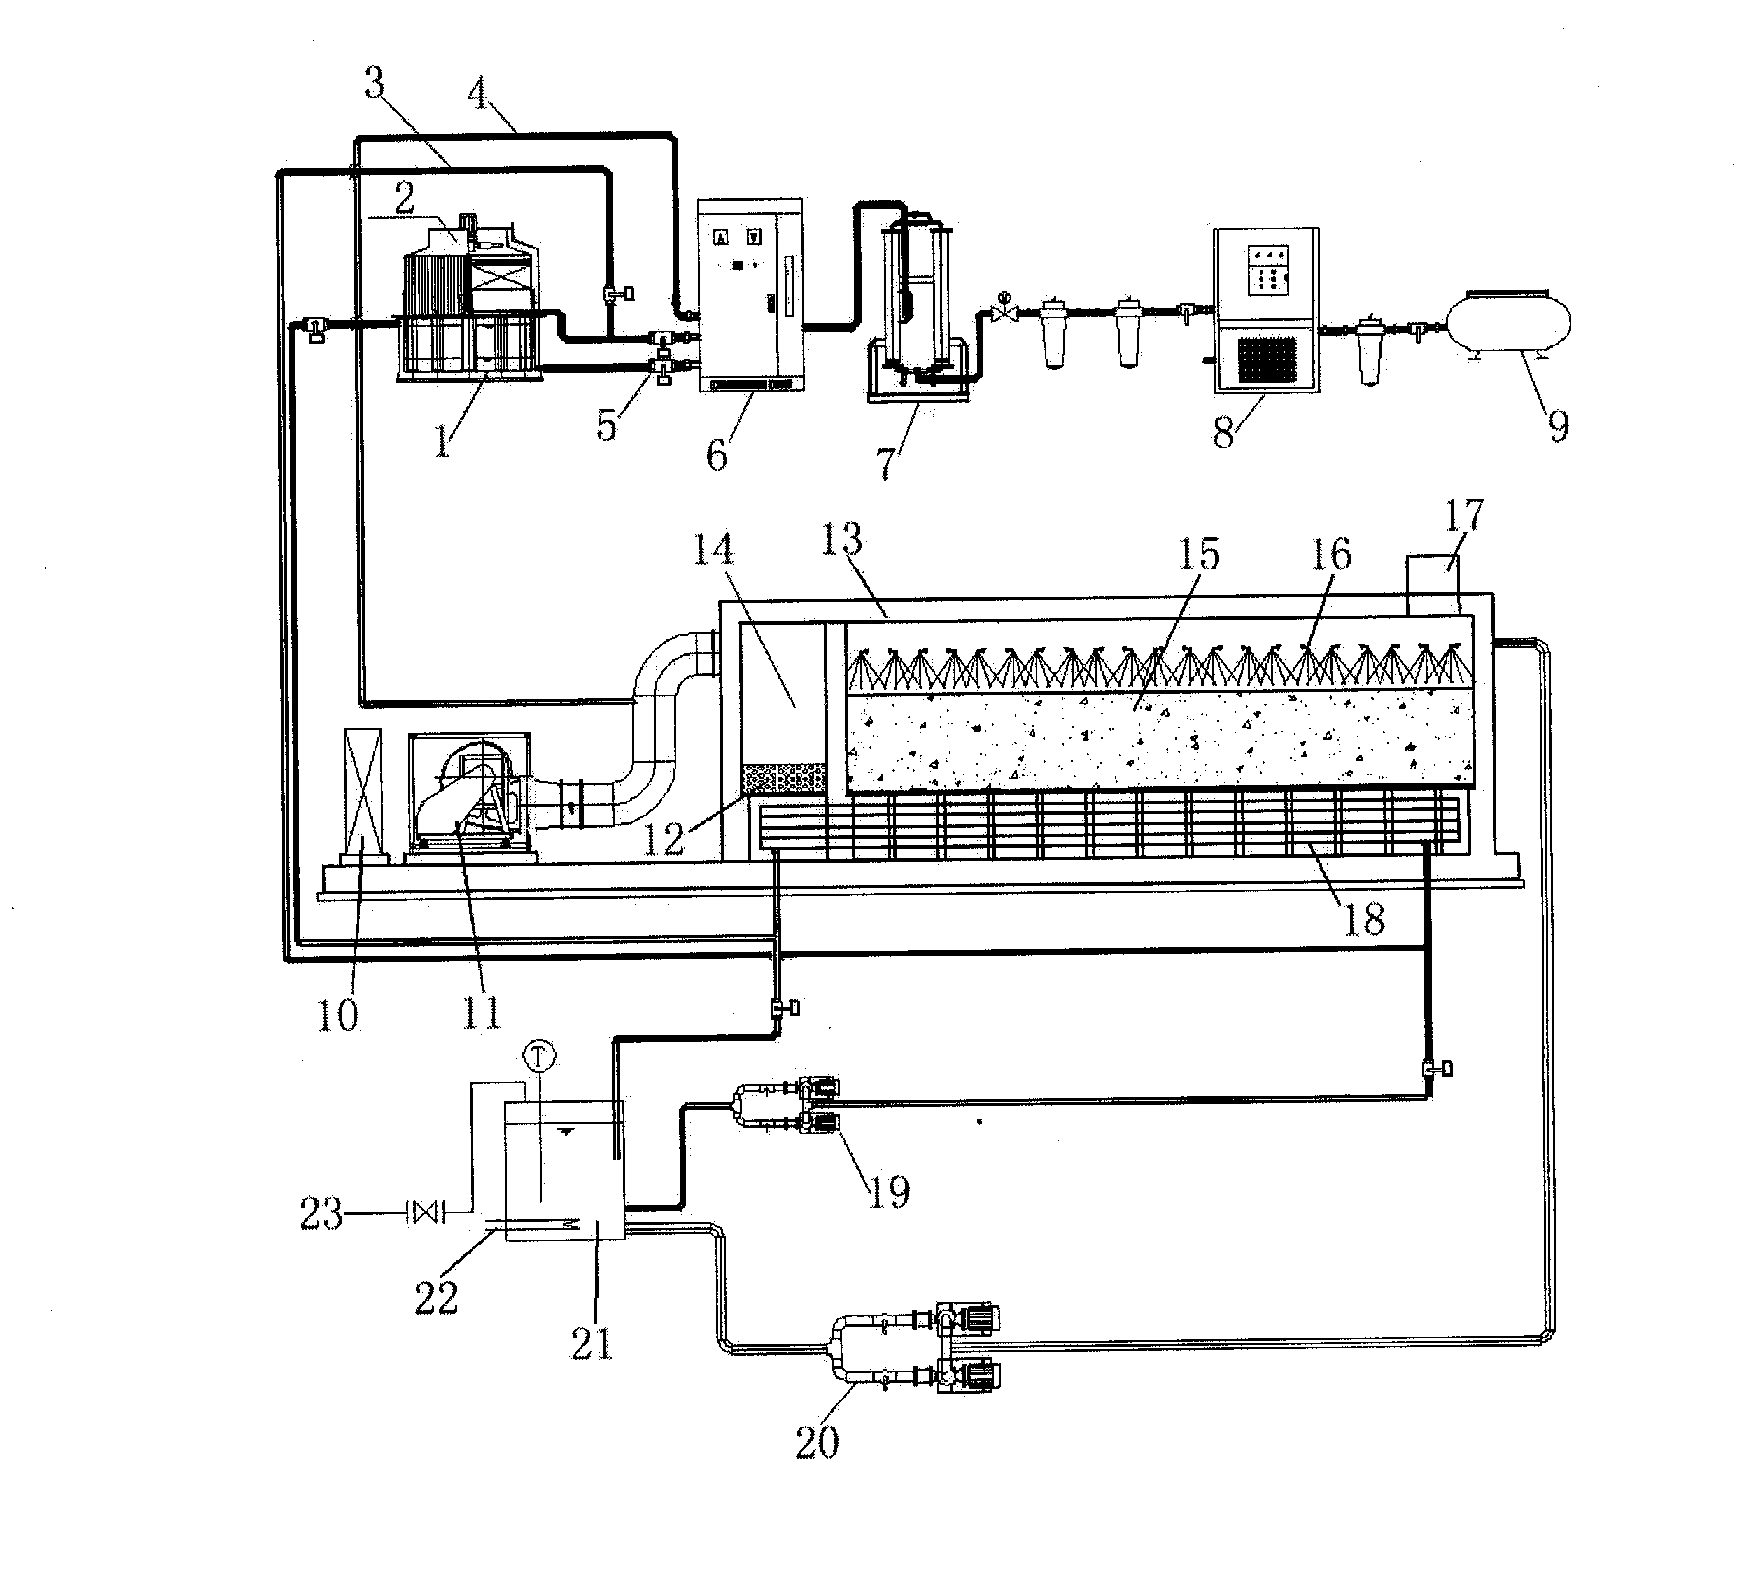 Low temperature organic malodorous gas treating system